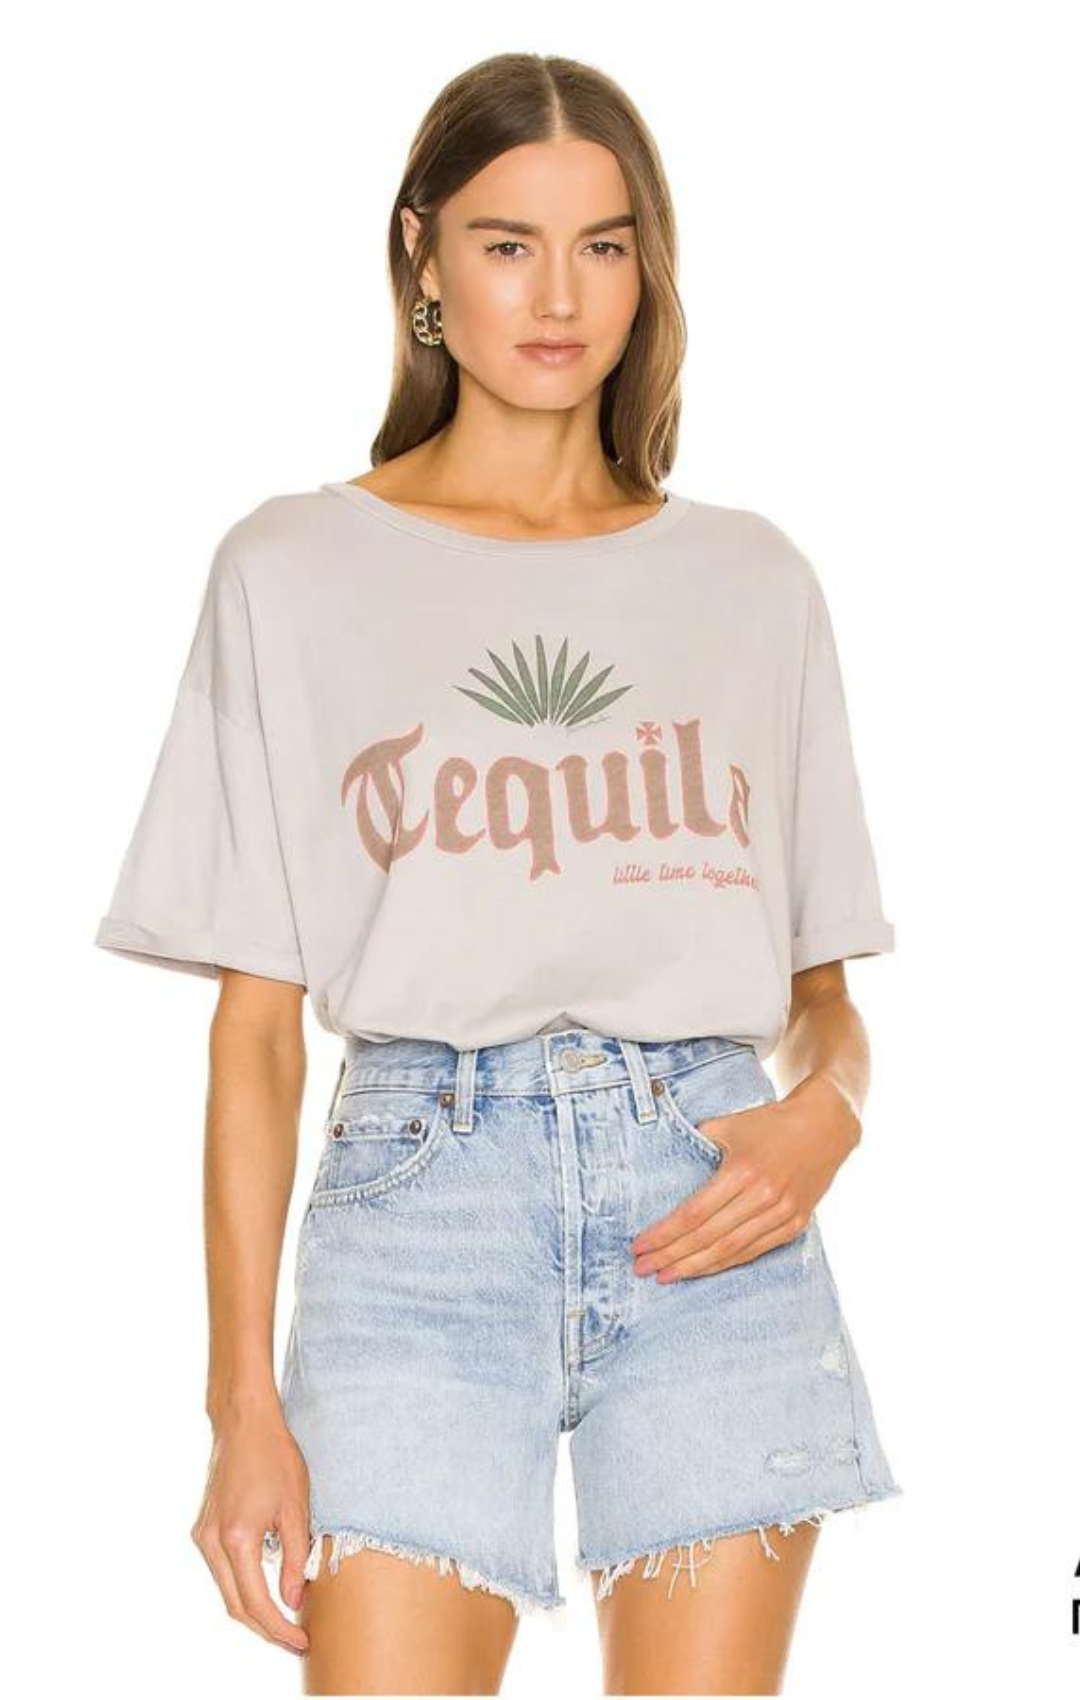 Tequila Oversized Tee by The Laundry Room